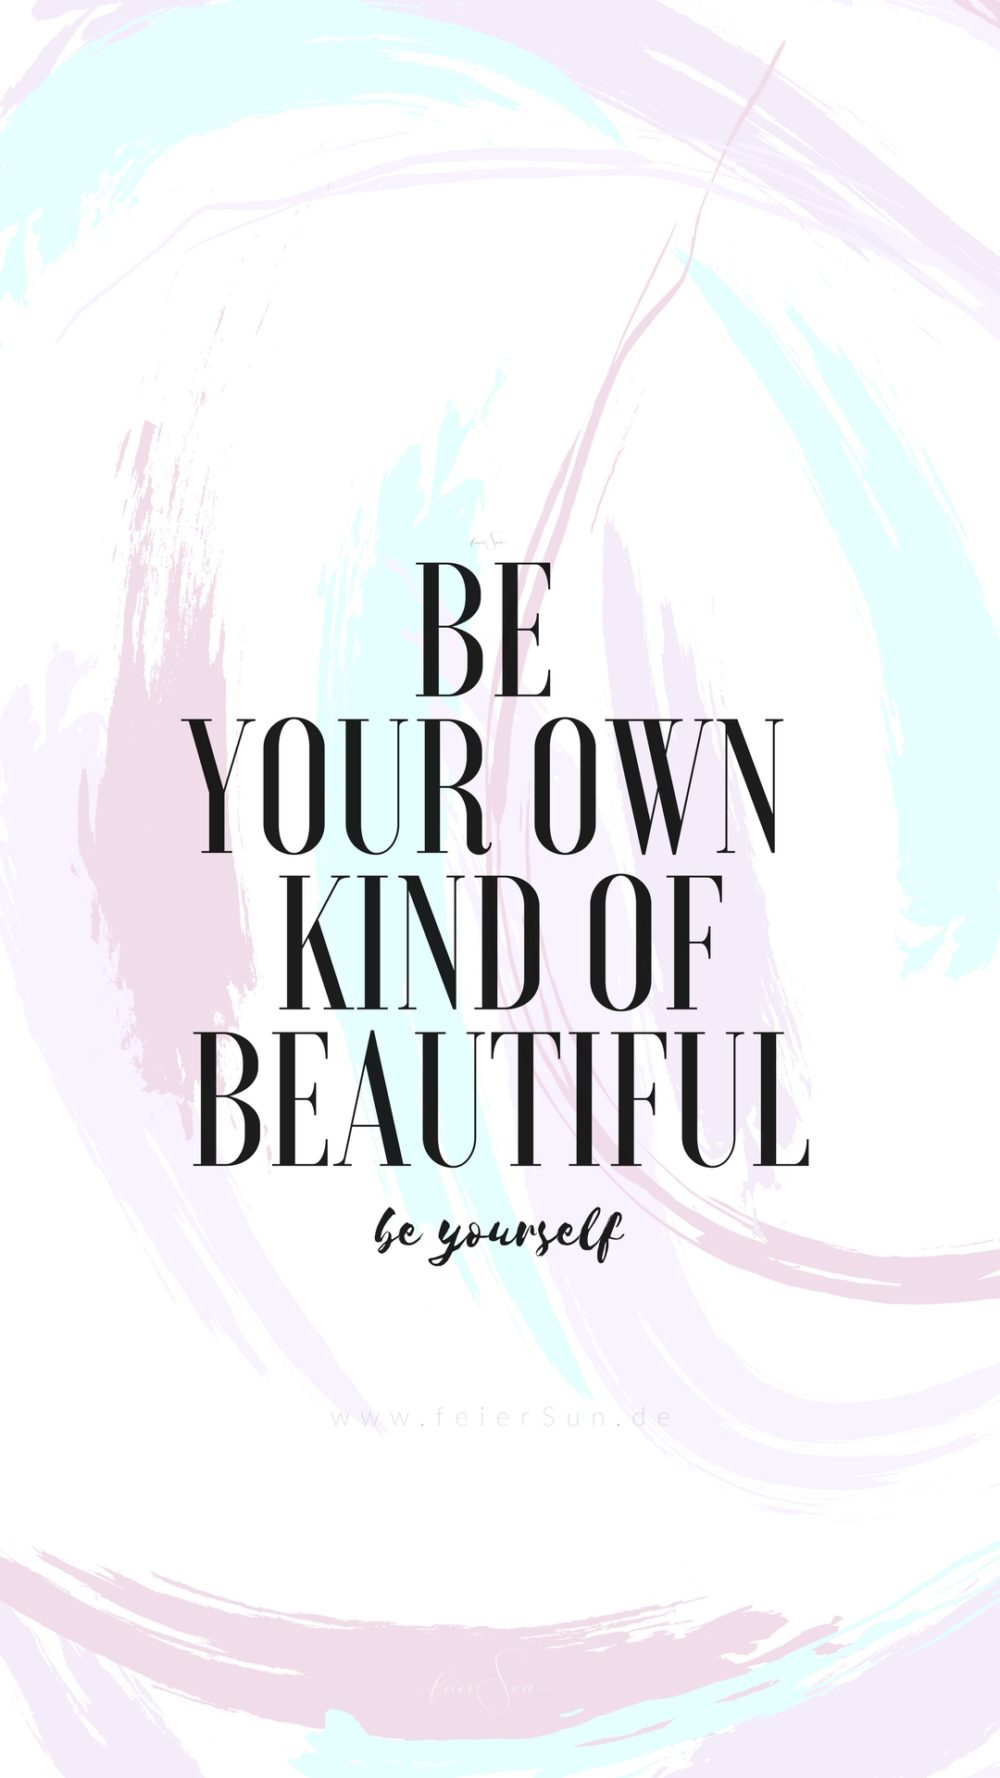 Wallpaper | be your own kind of beautiful